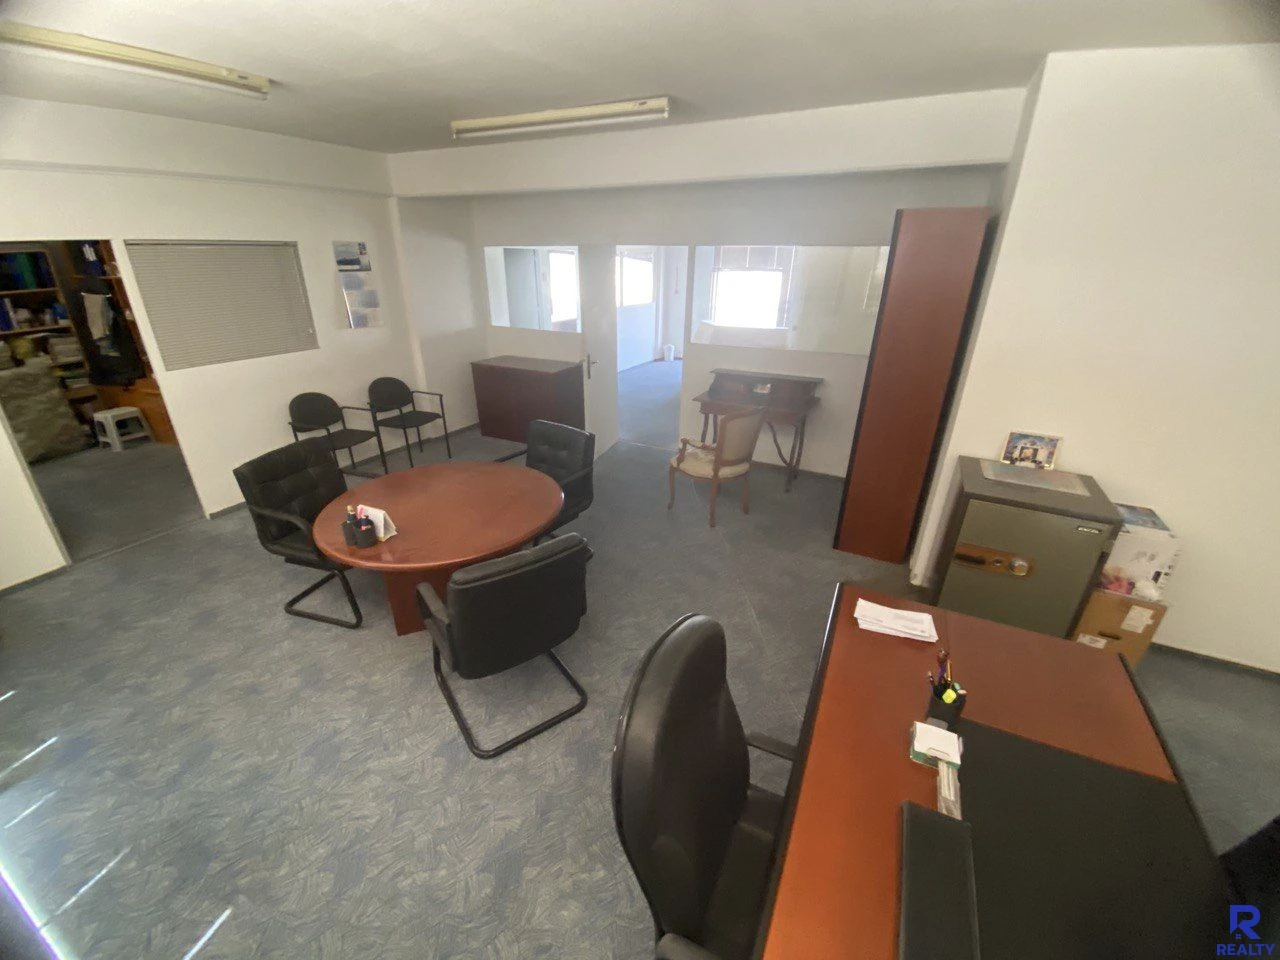 Office for rent, image 1